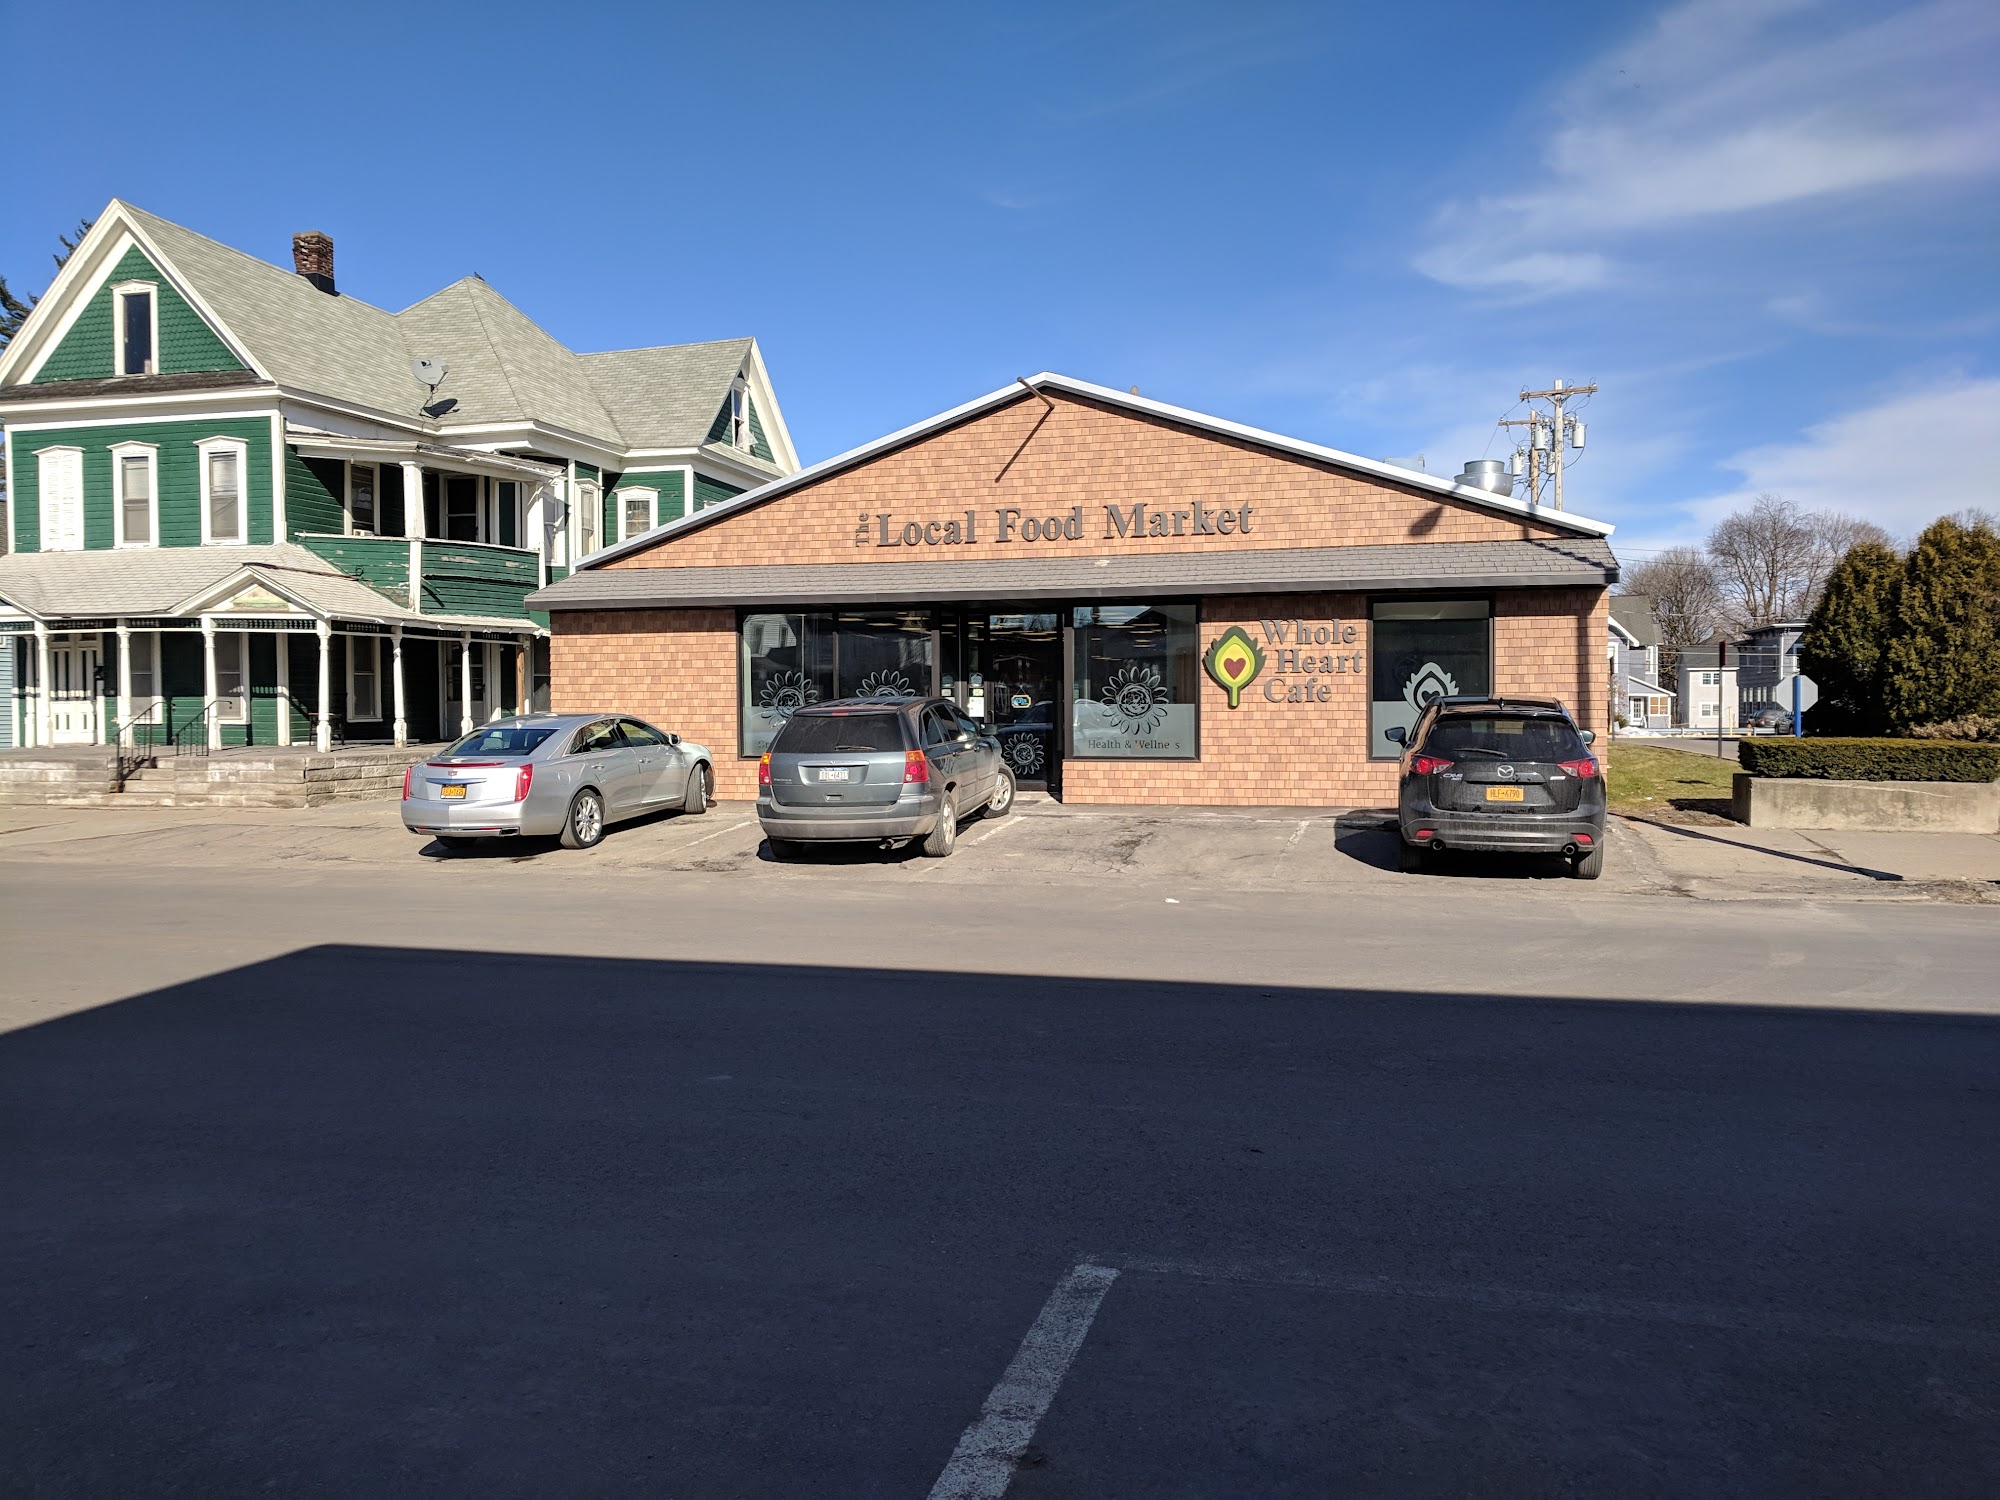 The Local Food Market & Cafe